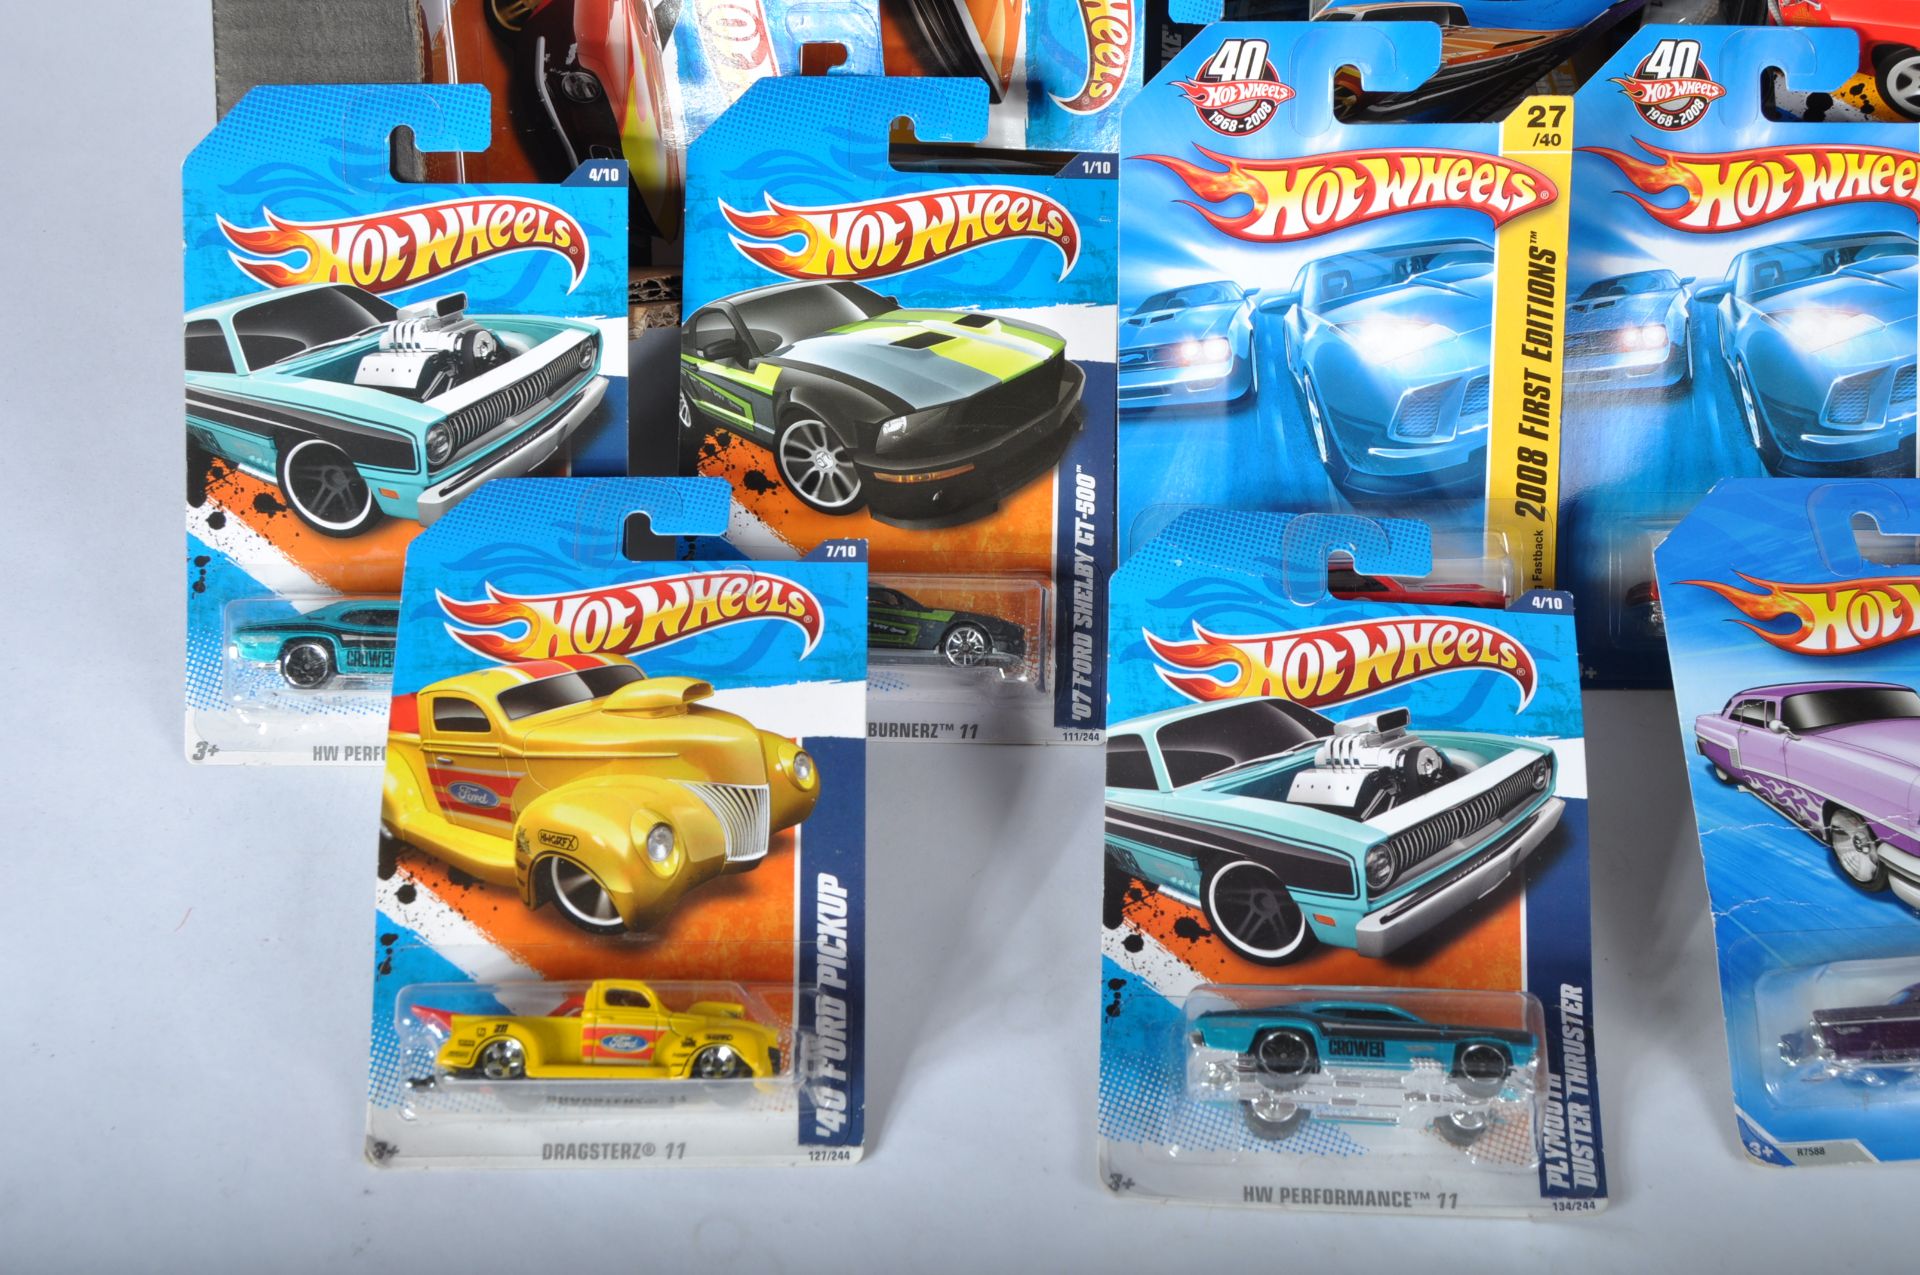 COLLECTION OF ASSORTED CARDED MATTEL HOT WHEELS DIECAST MODELS - Image 3 of 5